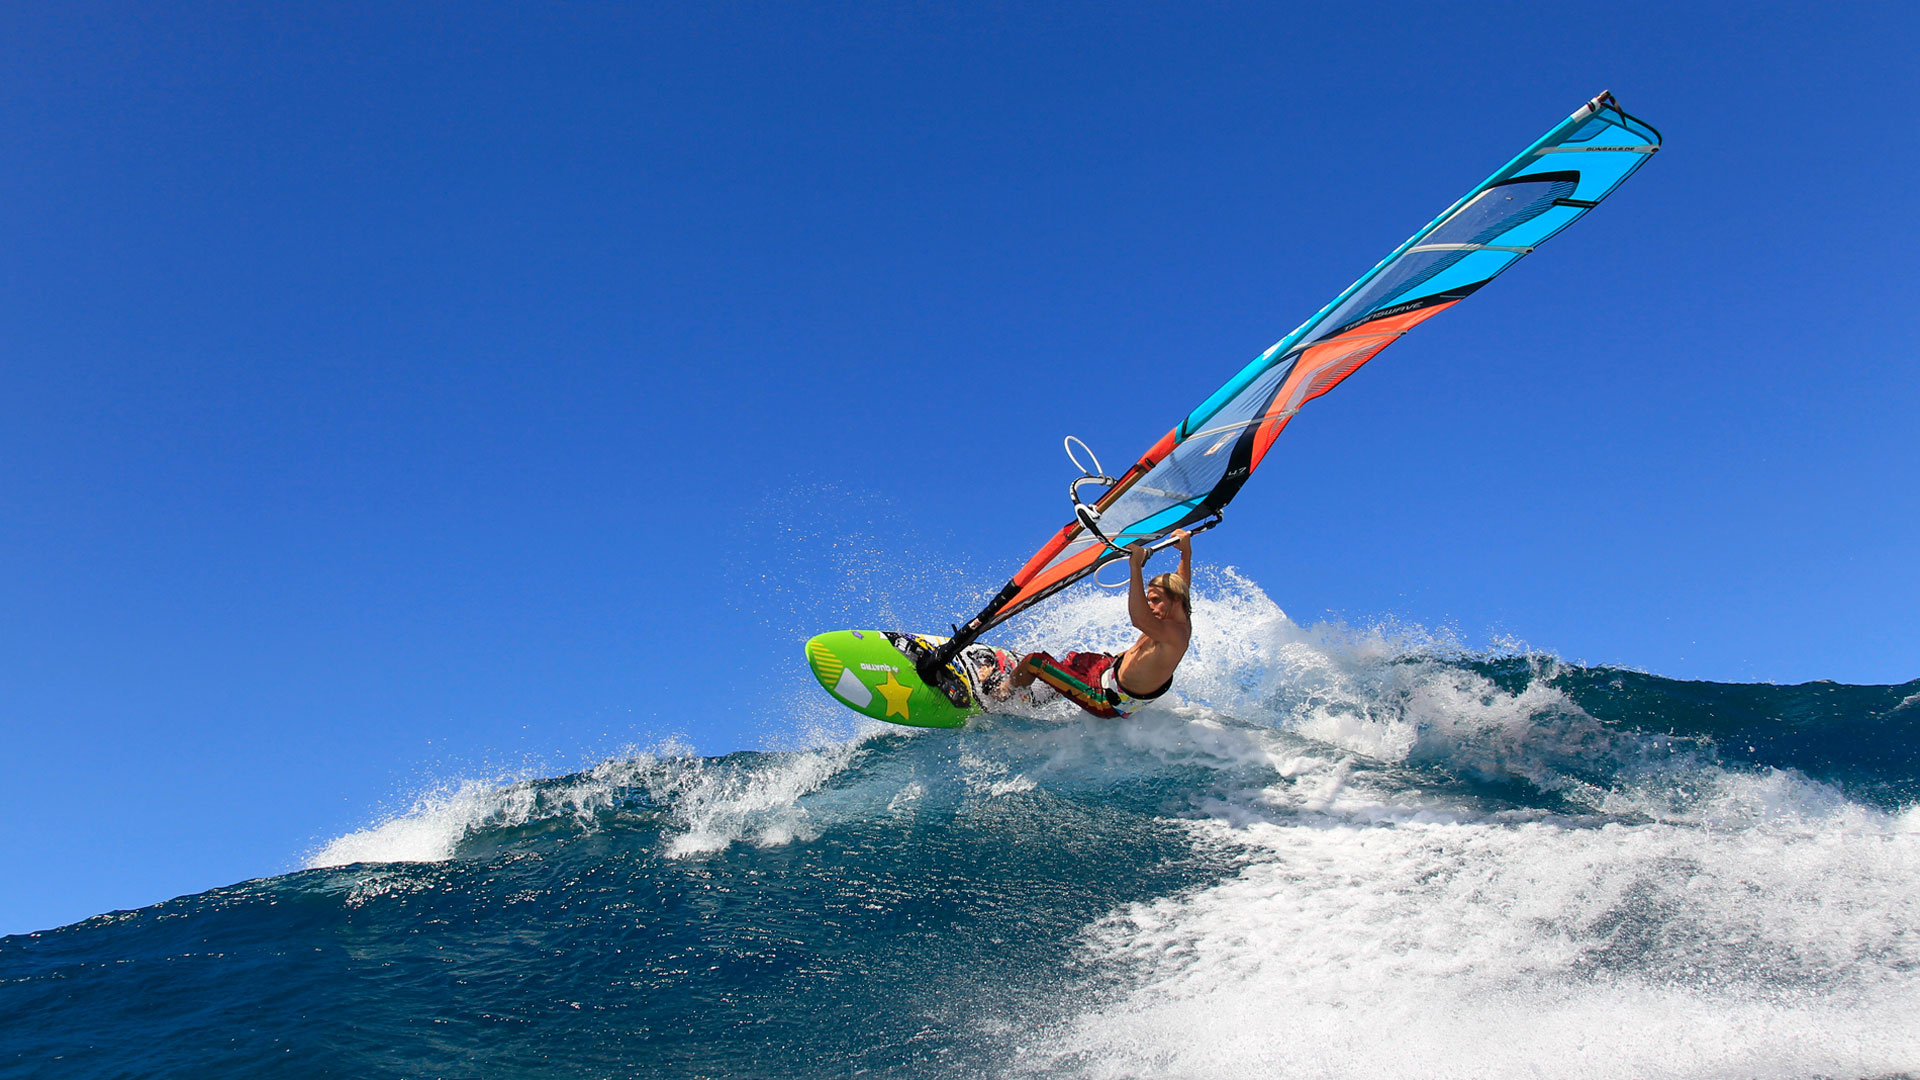 Windsurfing: Water Sports Events 2022, WA’s Surfing, Windsurfing and Kite-surfing. 1920x1080 Full HD Background.